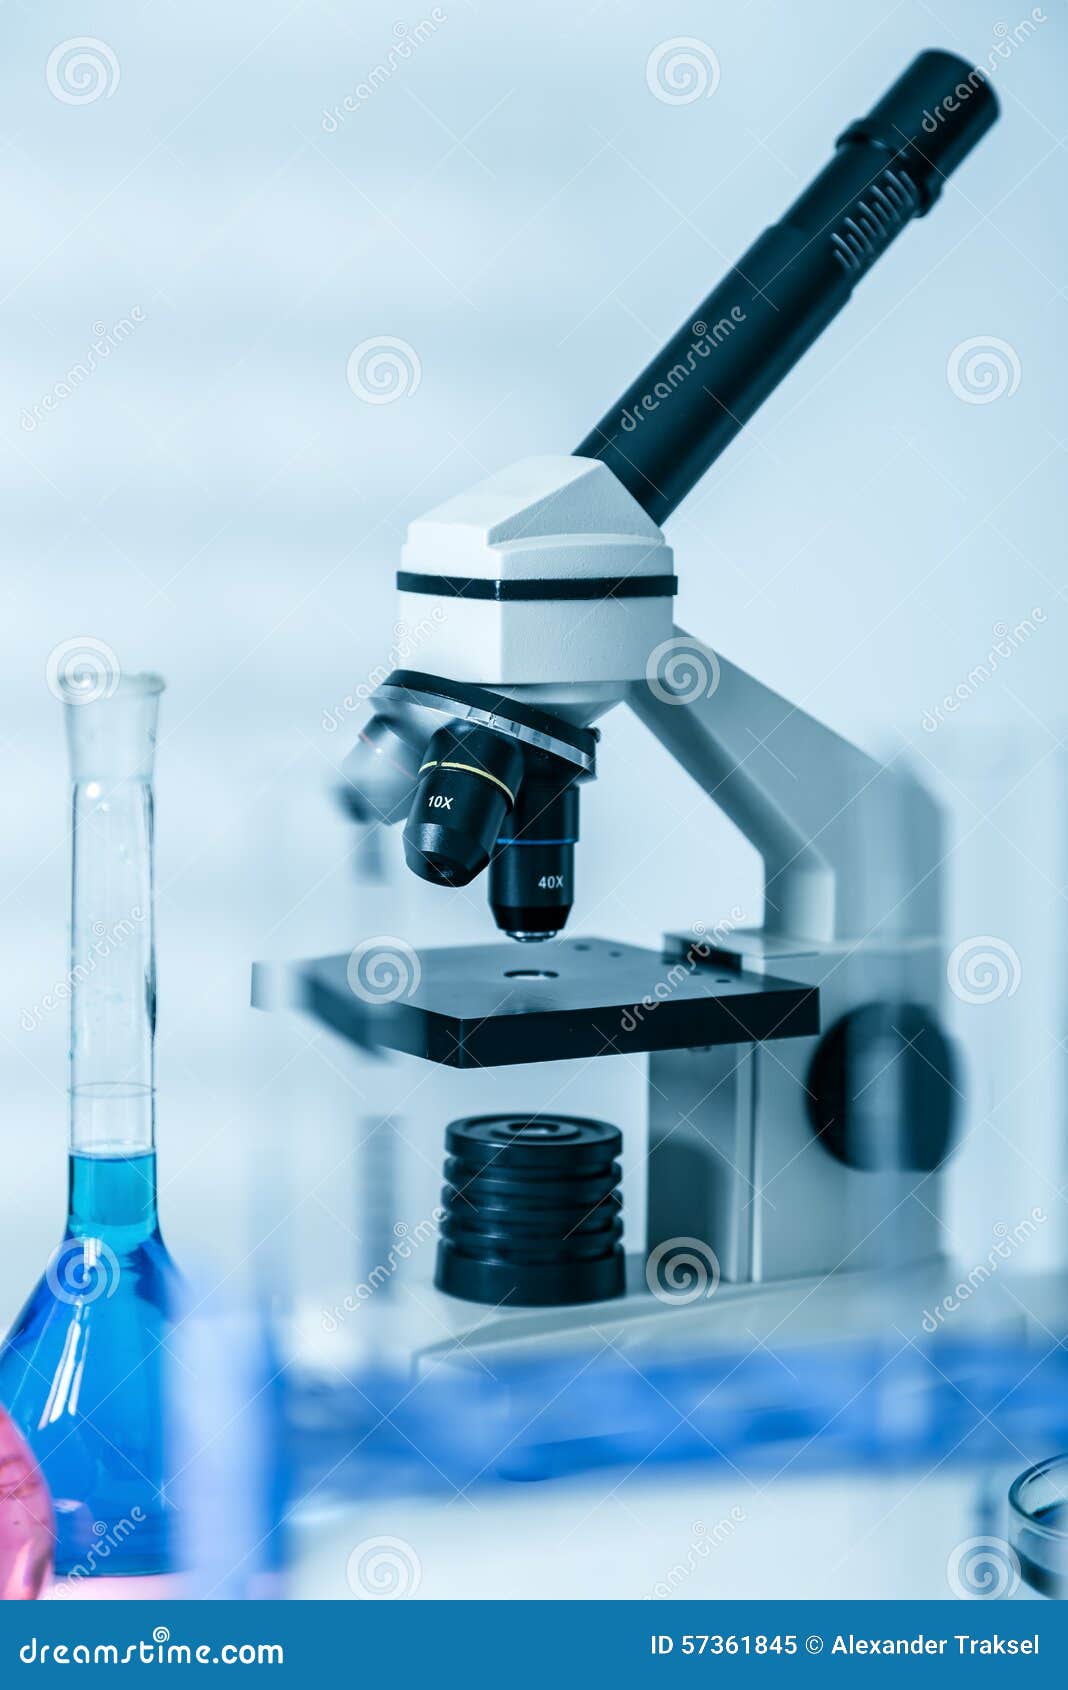 Laboratory Microscope Lens.modern Microscopes in a Stock Image - Image ...